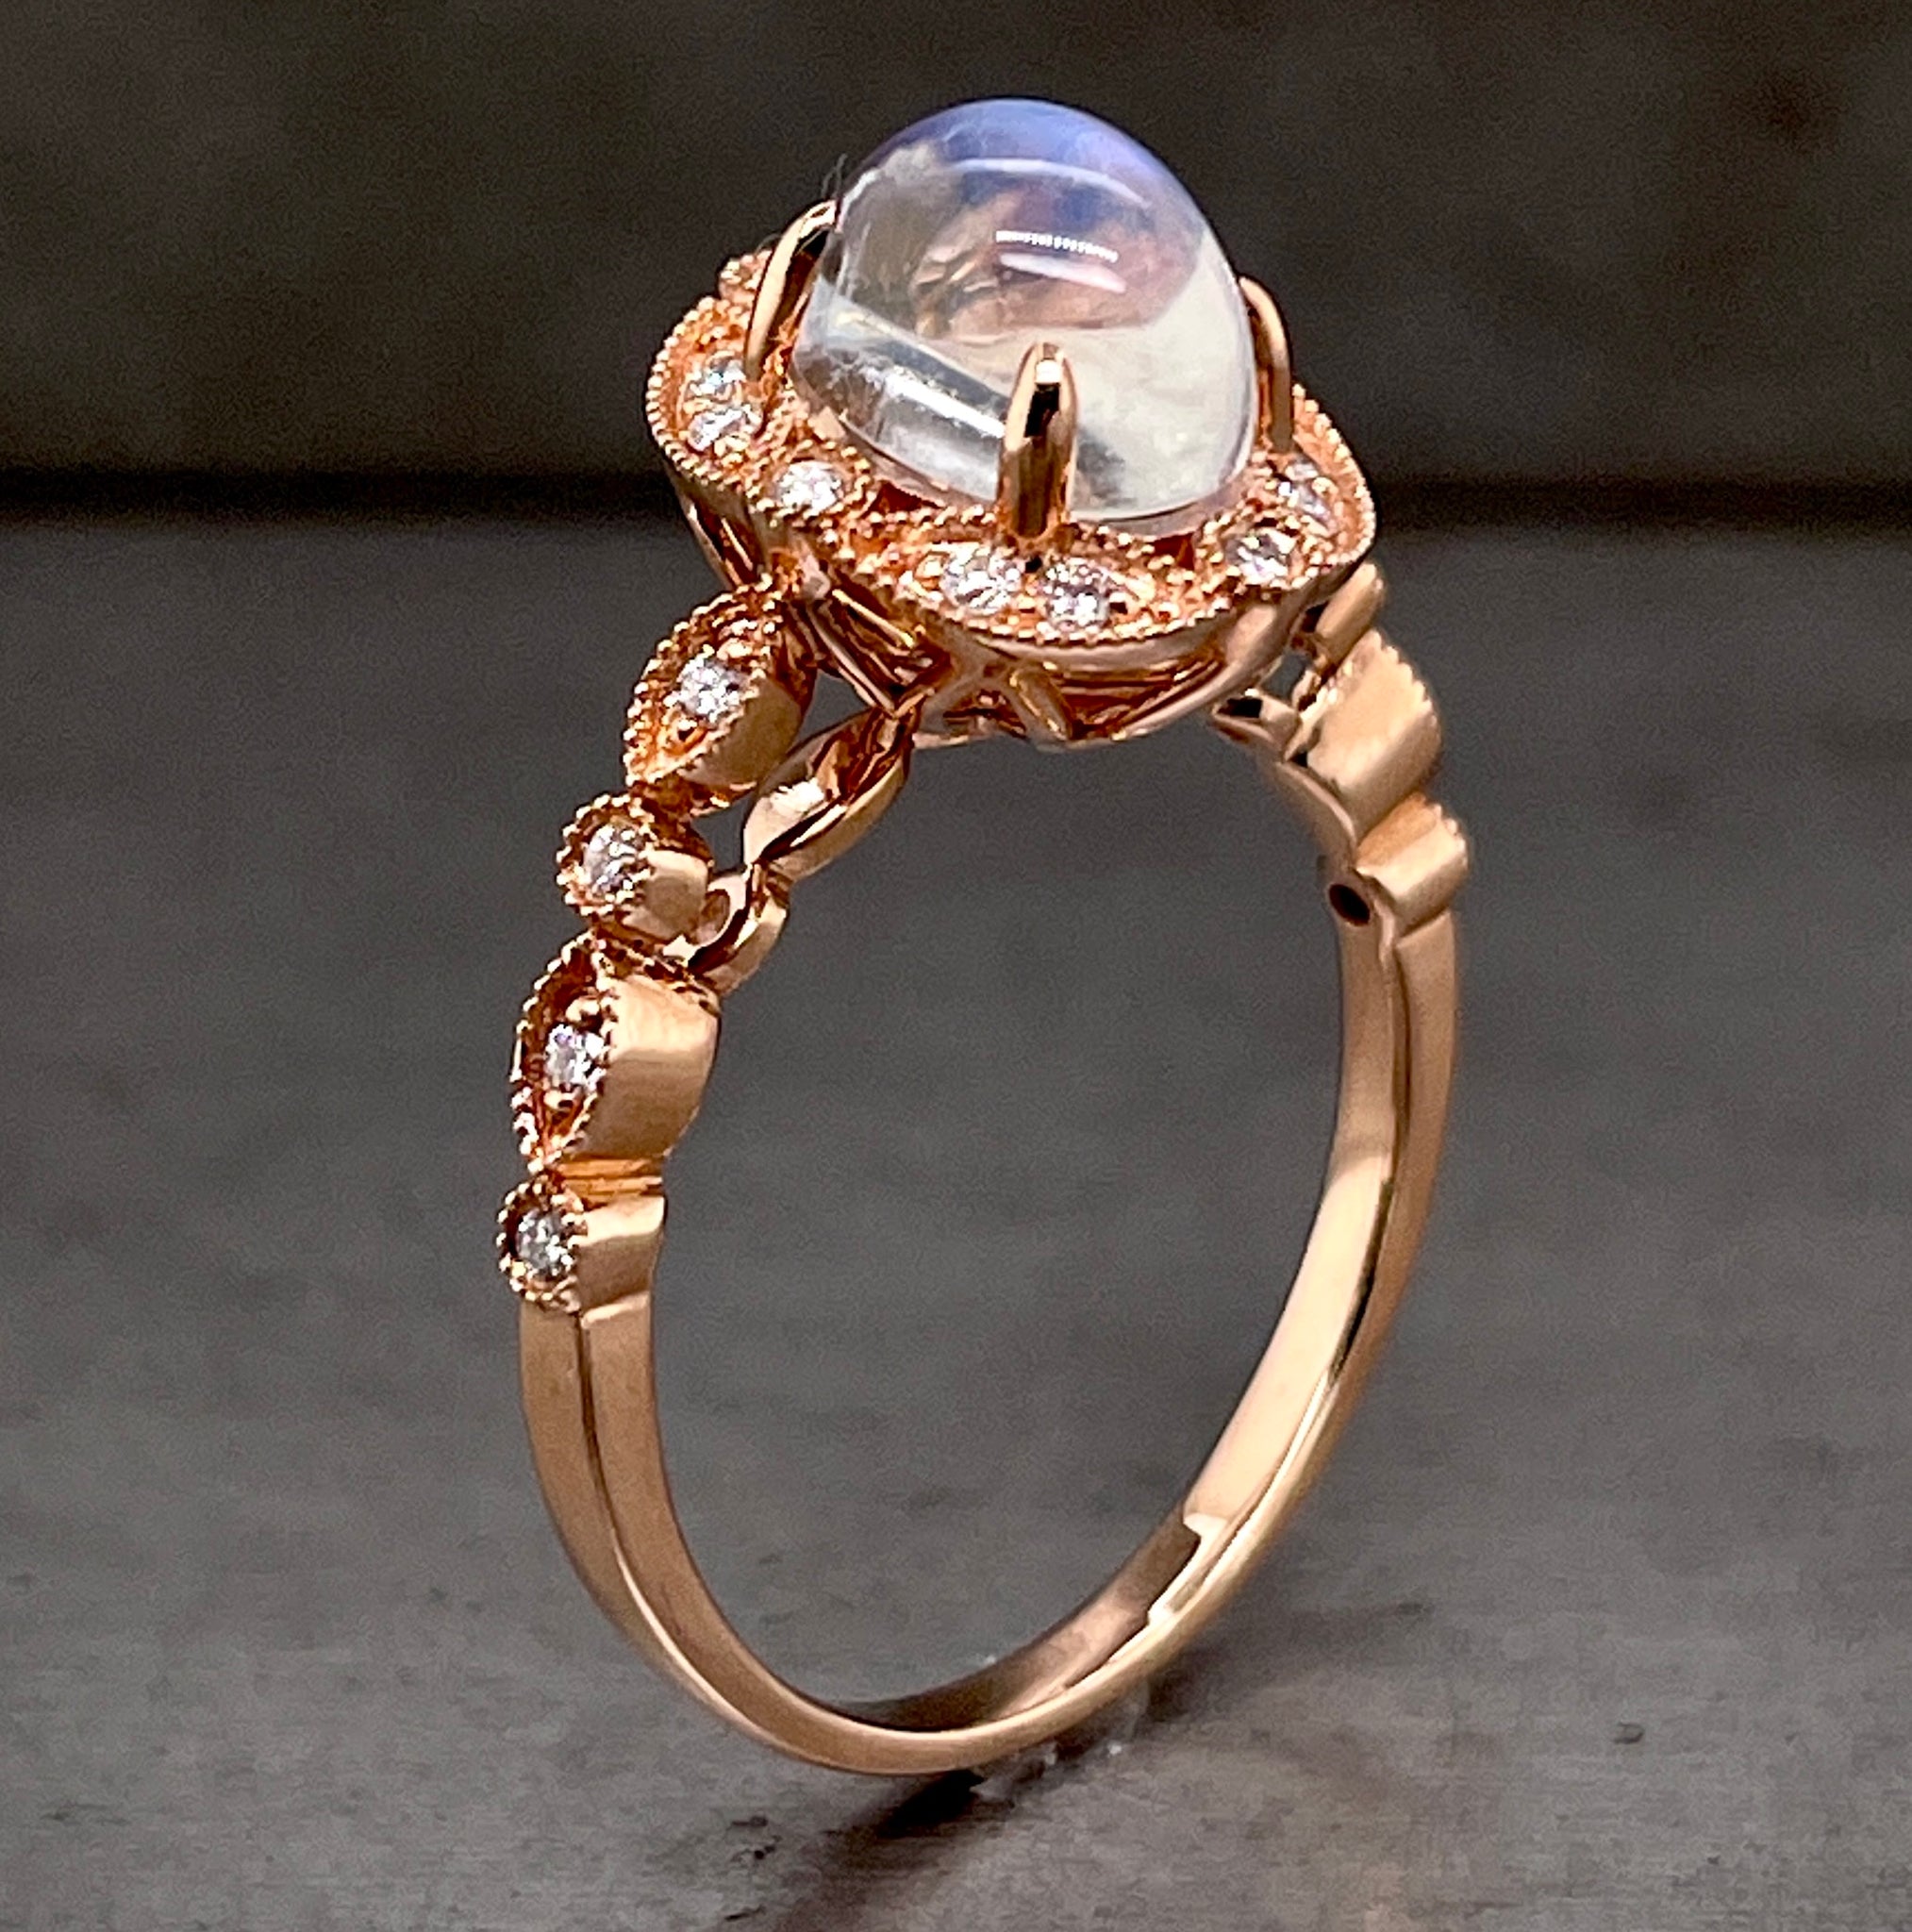 Angled side view of rose gold moonstone ring standing up. Here you can start to see an intricate design within the underside of the head setting of the moonstone.